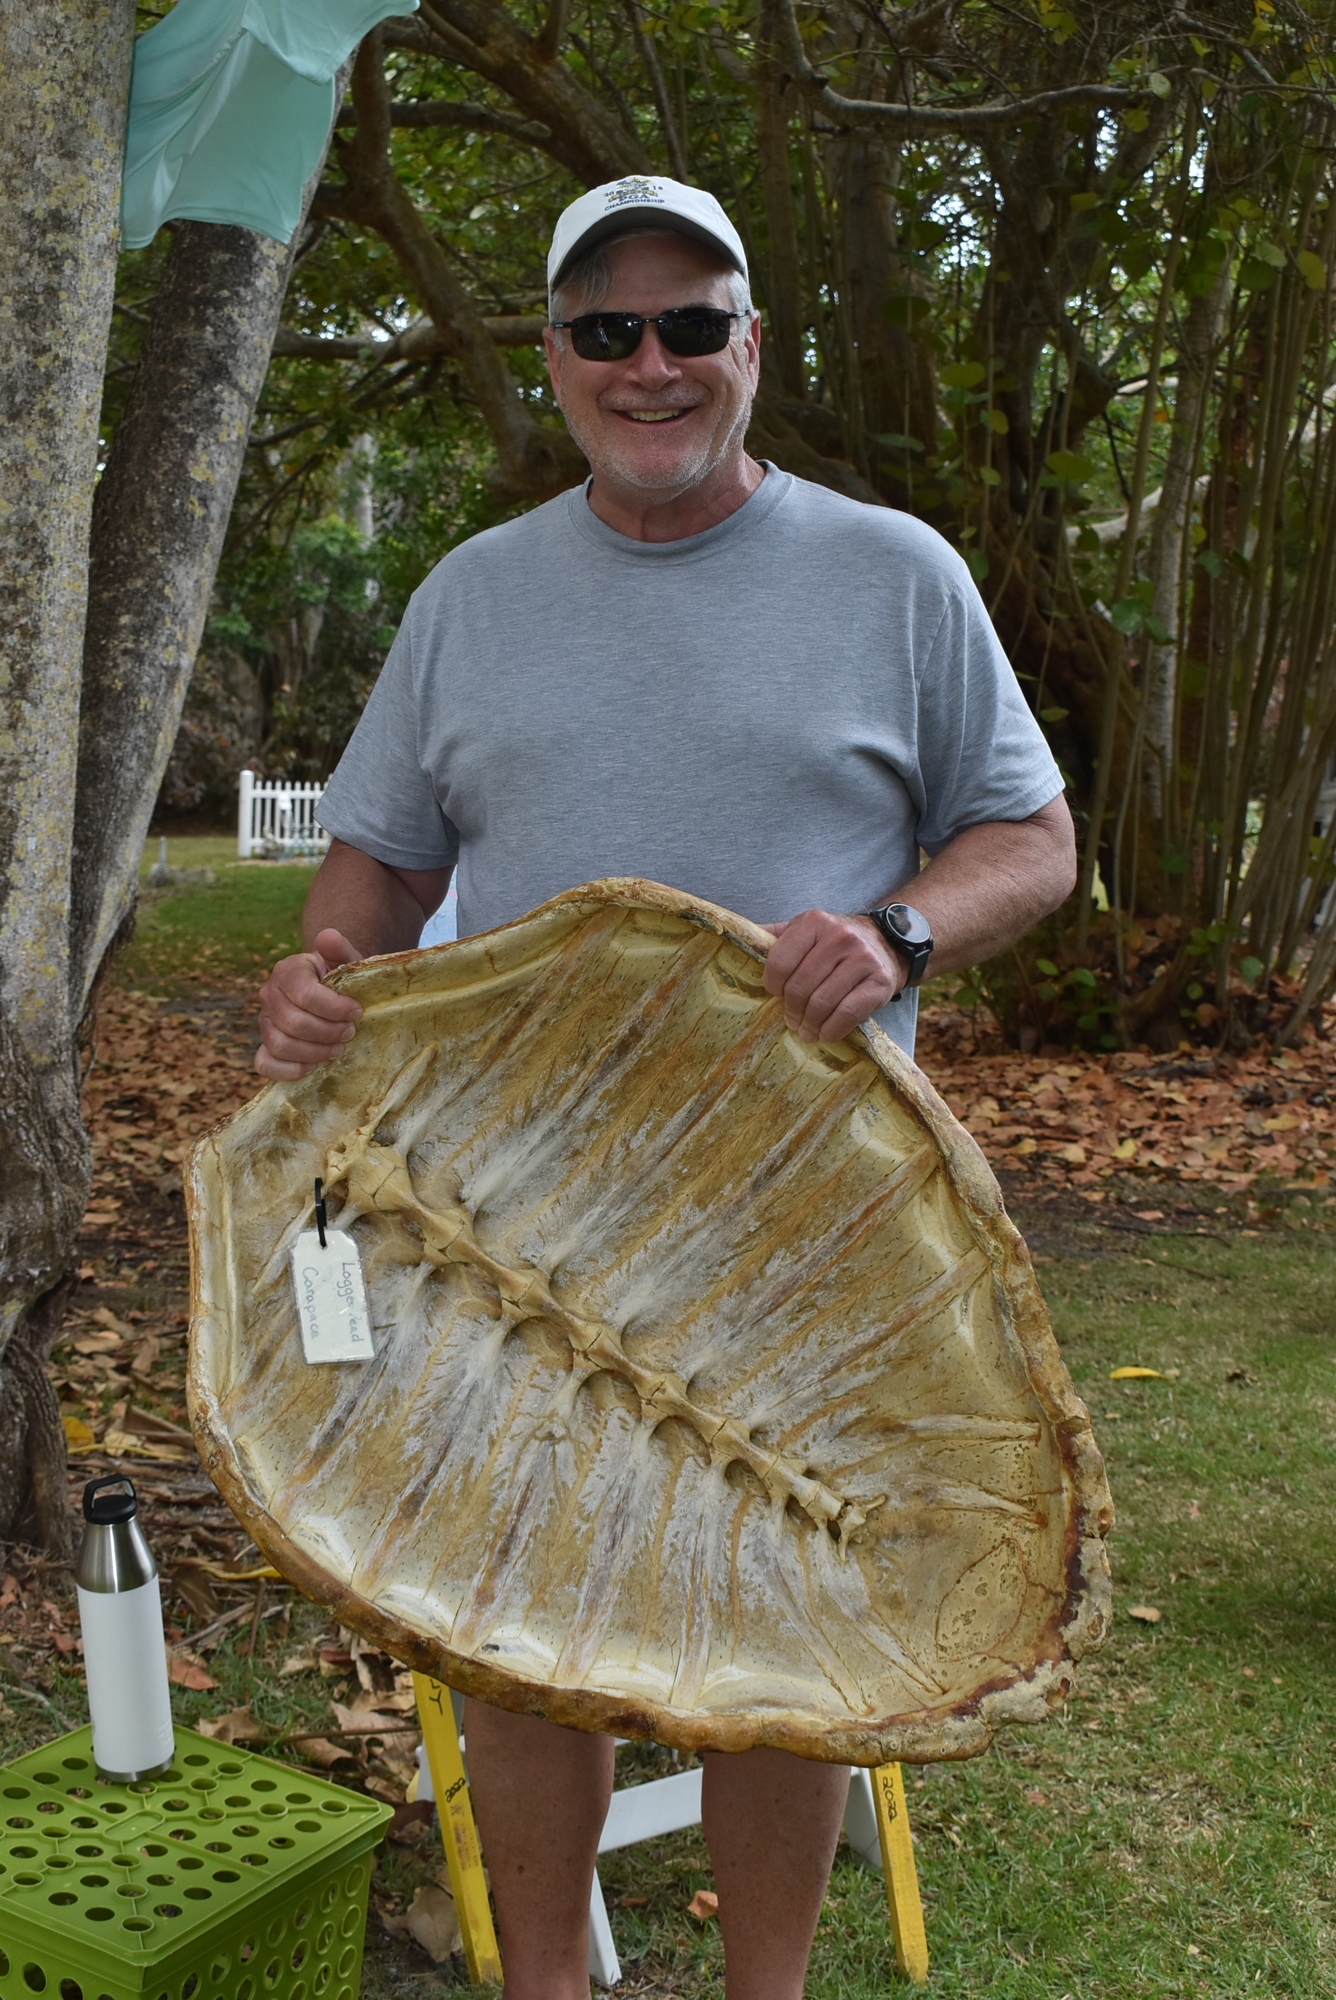 Mike Scanlon hoists a turtle shell at the LBKTW table.